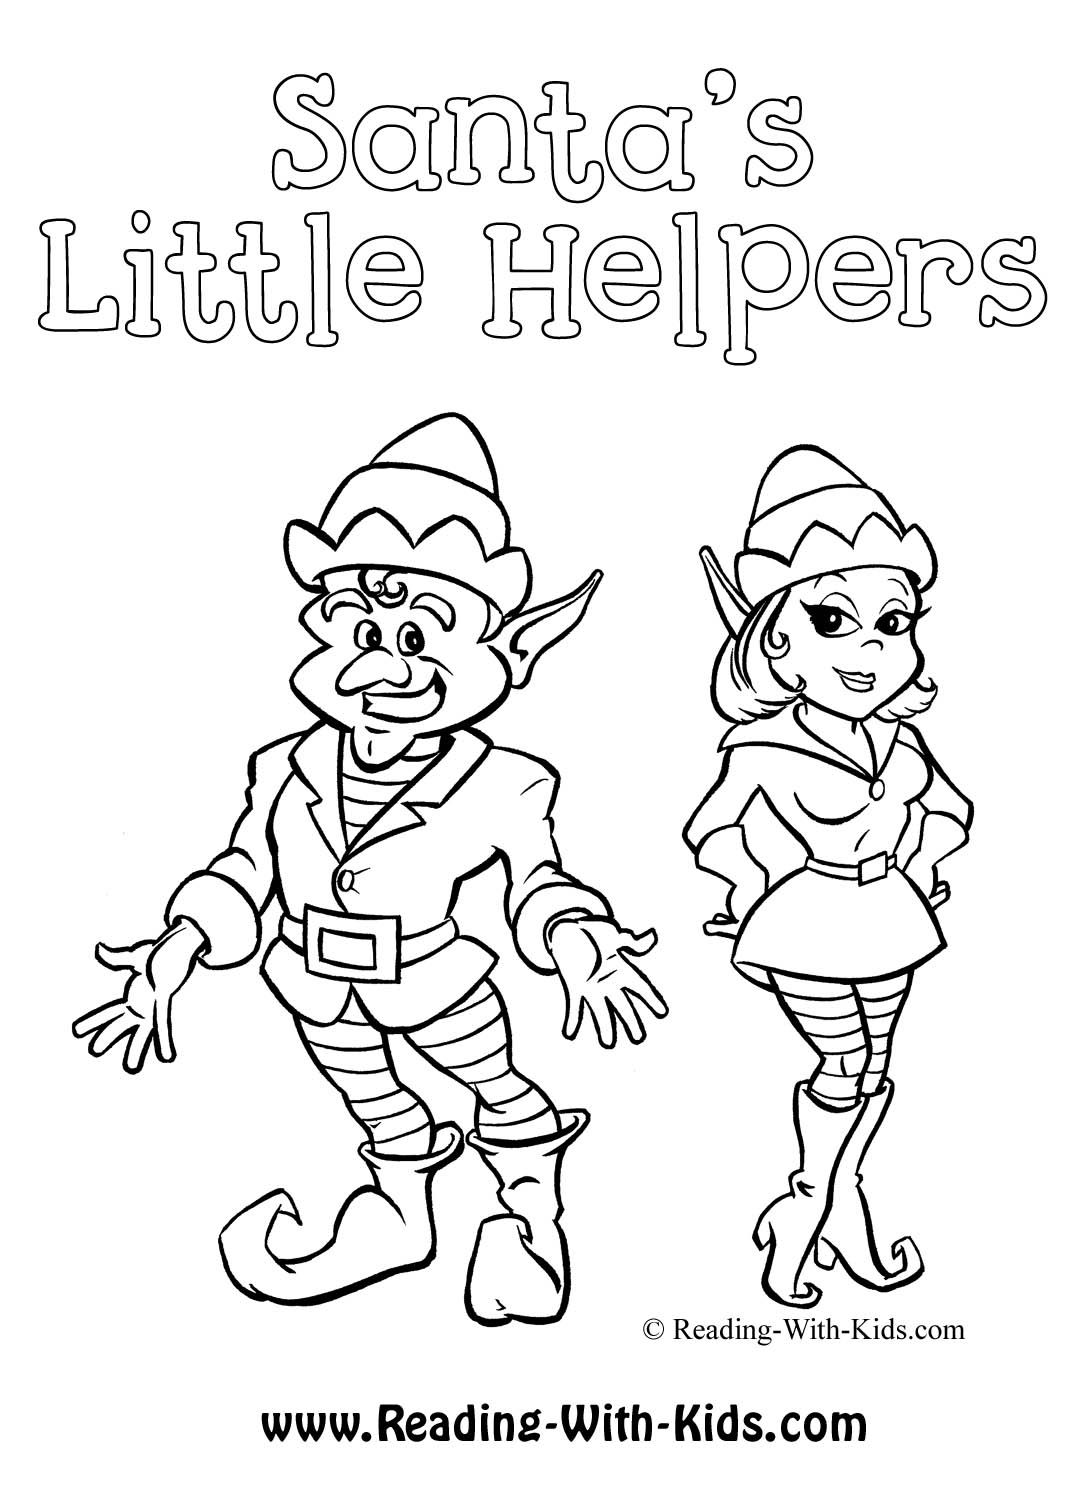 Little Helpers Coloring Pages Christmas | Coloring pages for ...